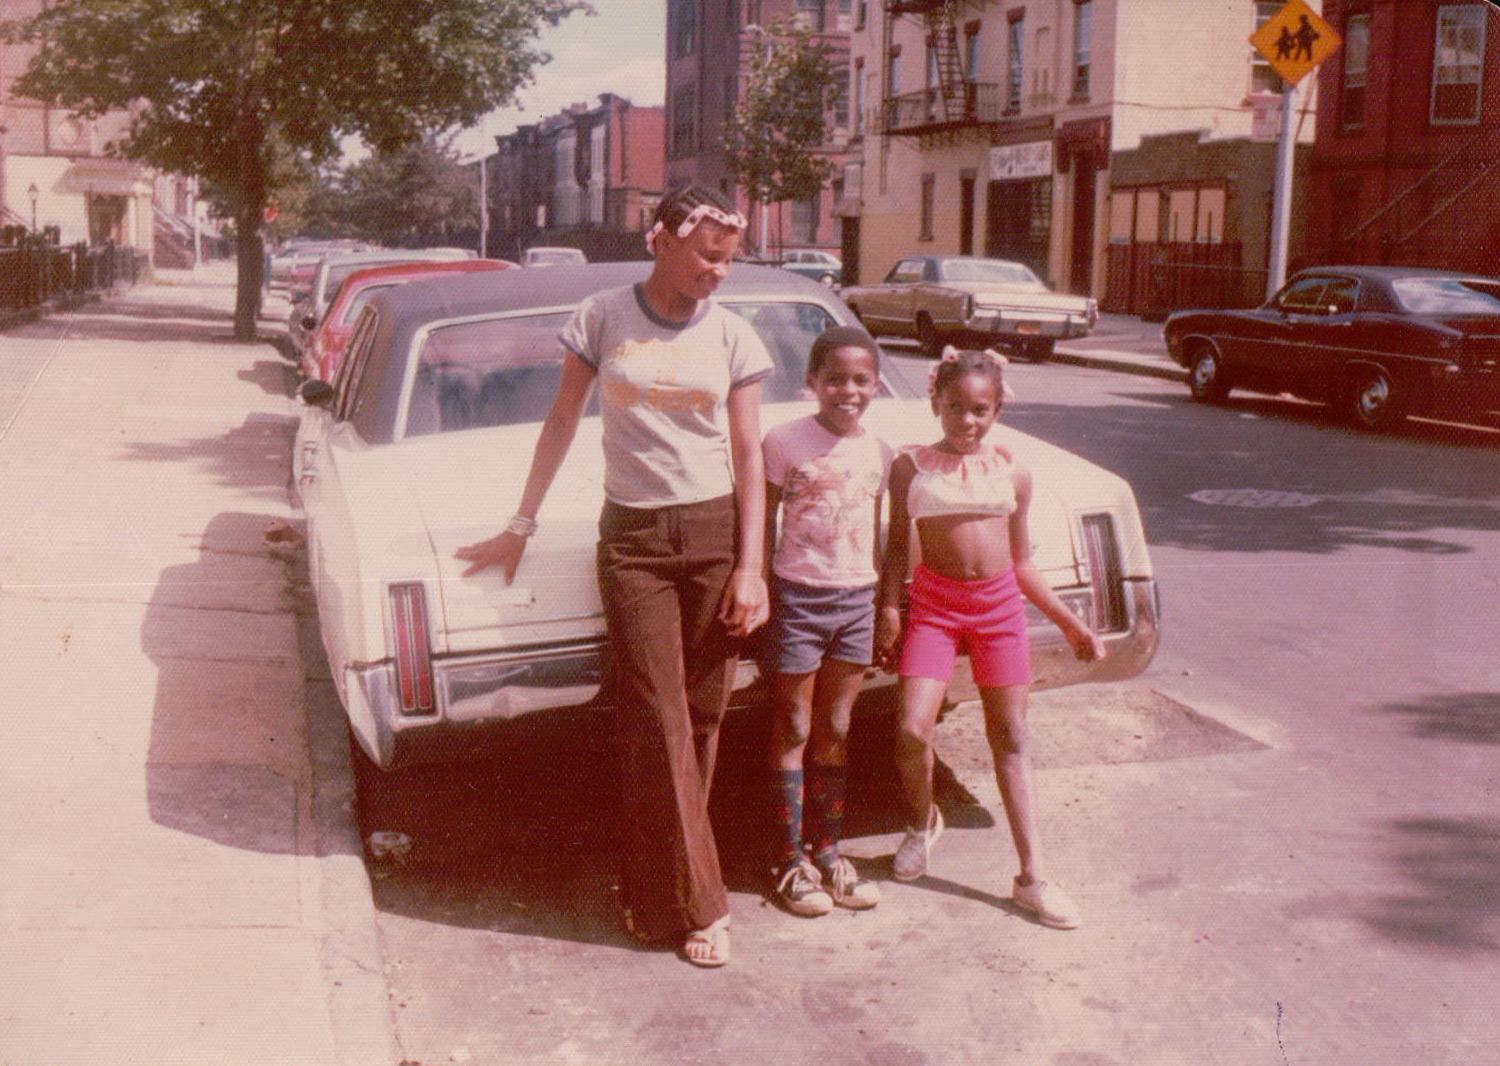 Martin Pierre and two other people in Brooklyn in the 70s or early 80s.